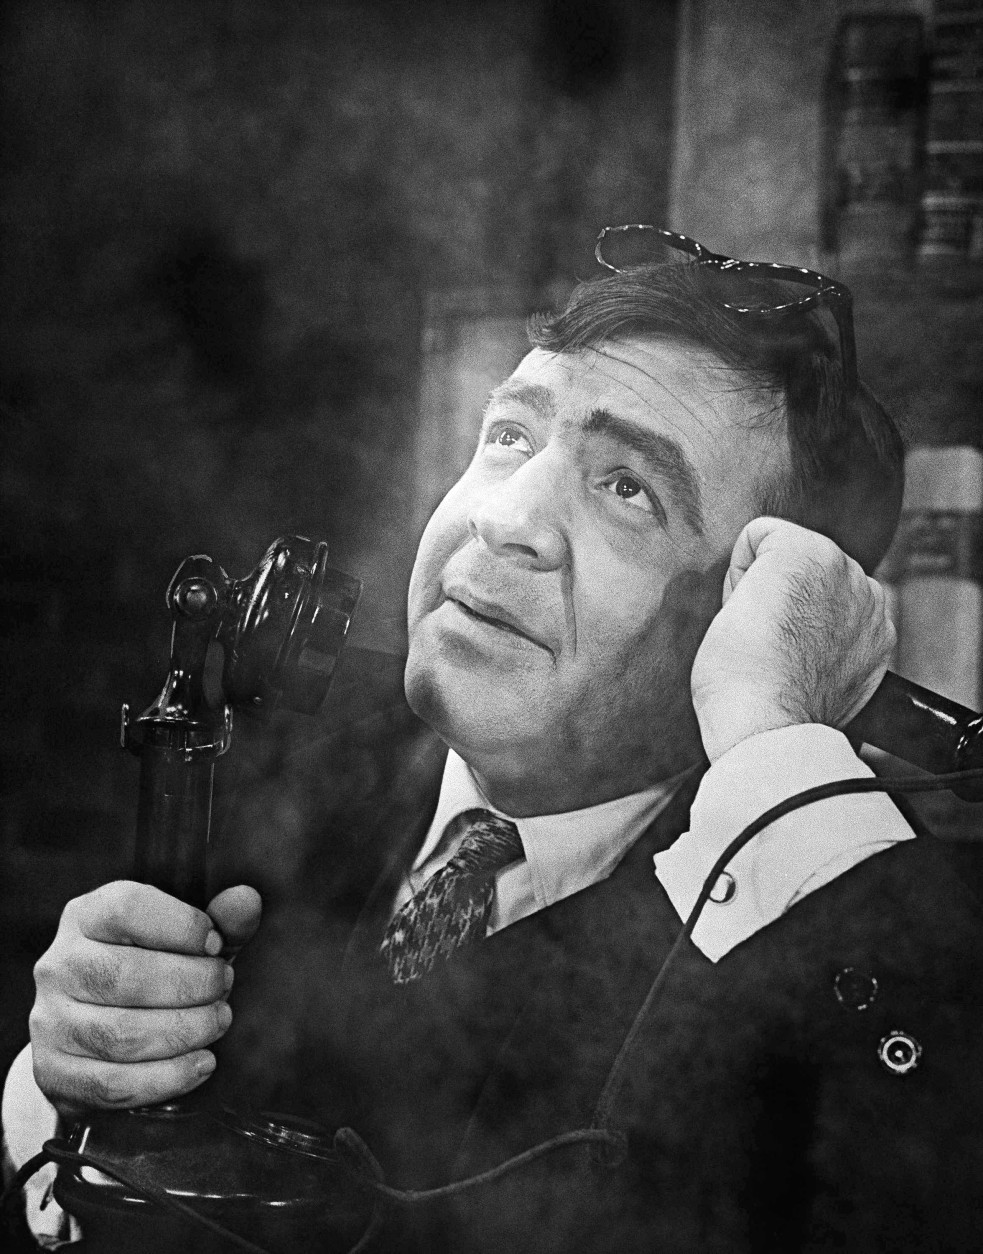 Actor Tom Bosley is pictured on May 2, 1960 in scene from Broadway Musical "Fiorello" which was named Pulitzer Prize winning play. Bosley appears in title role portraying late Mayor LaGuardia of New York. (AP Photo)